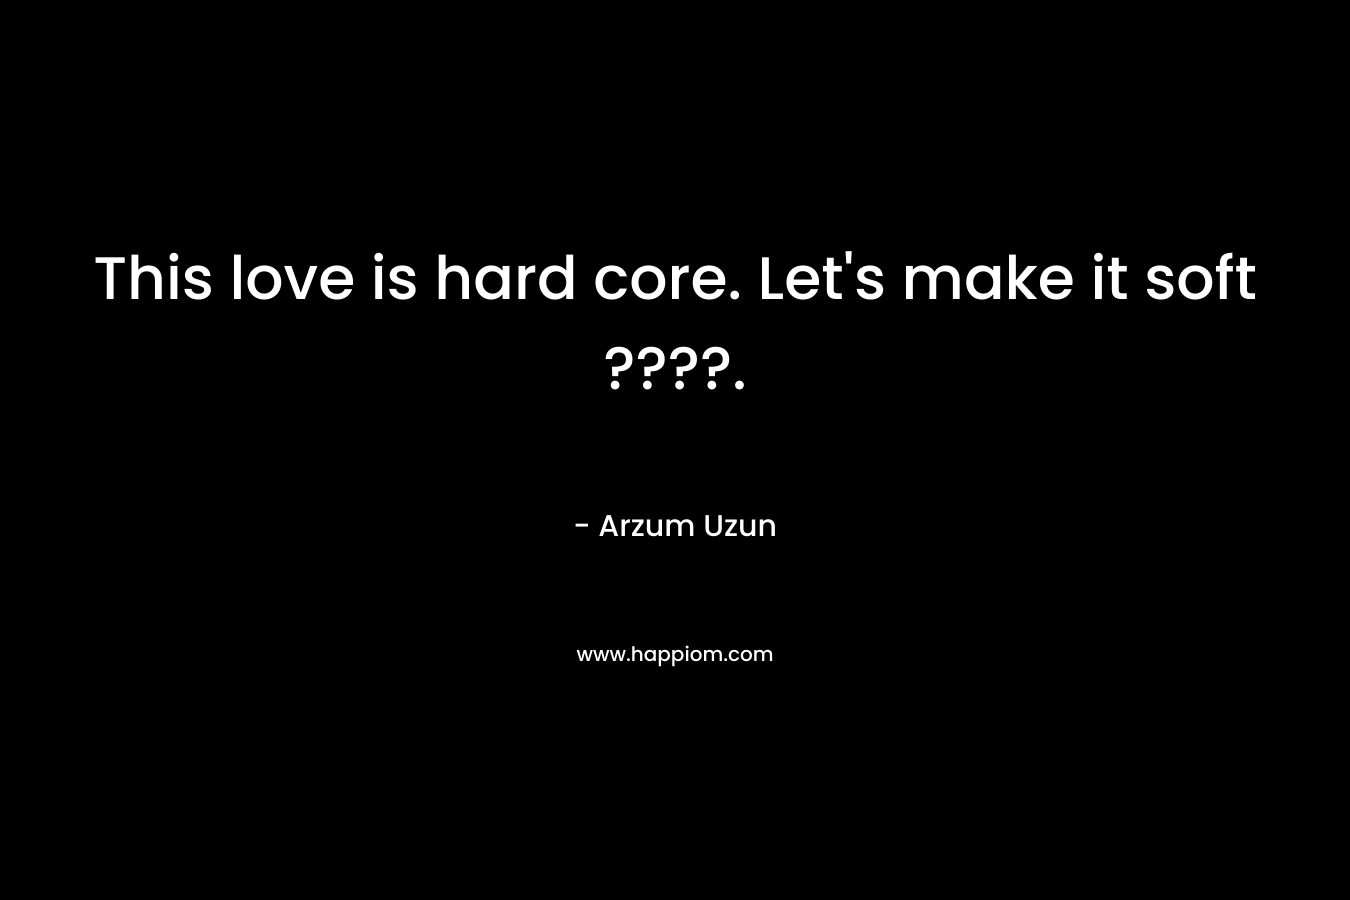 This love is hard core. Let's make it soft ????.